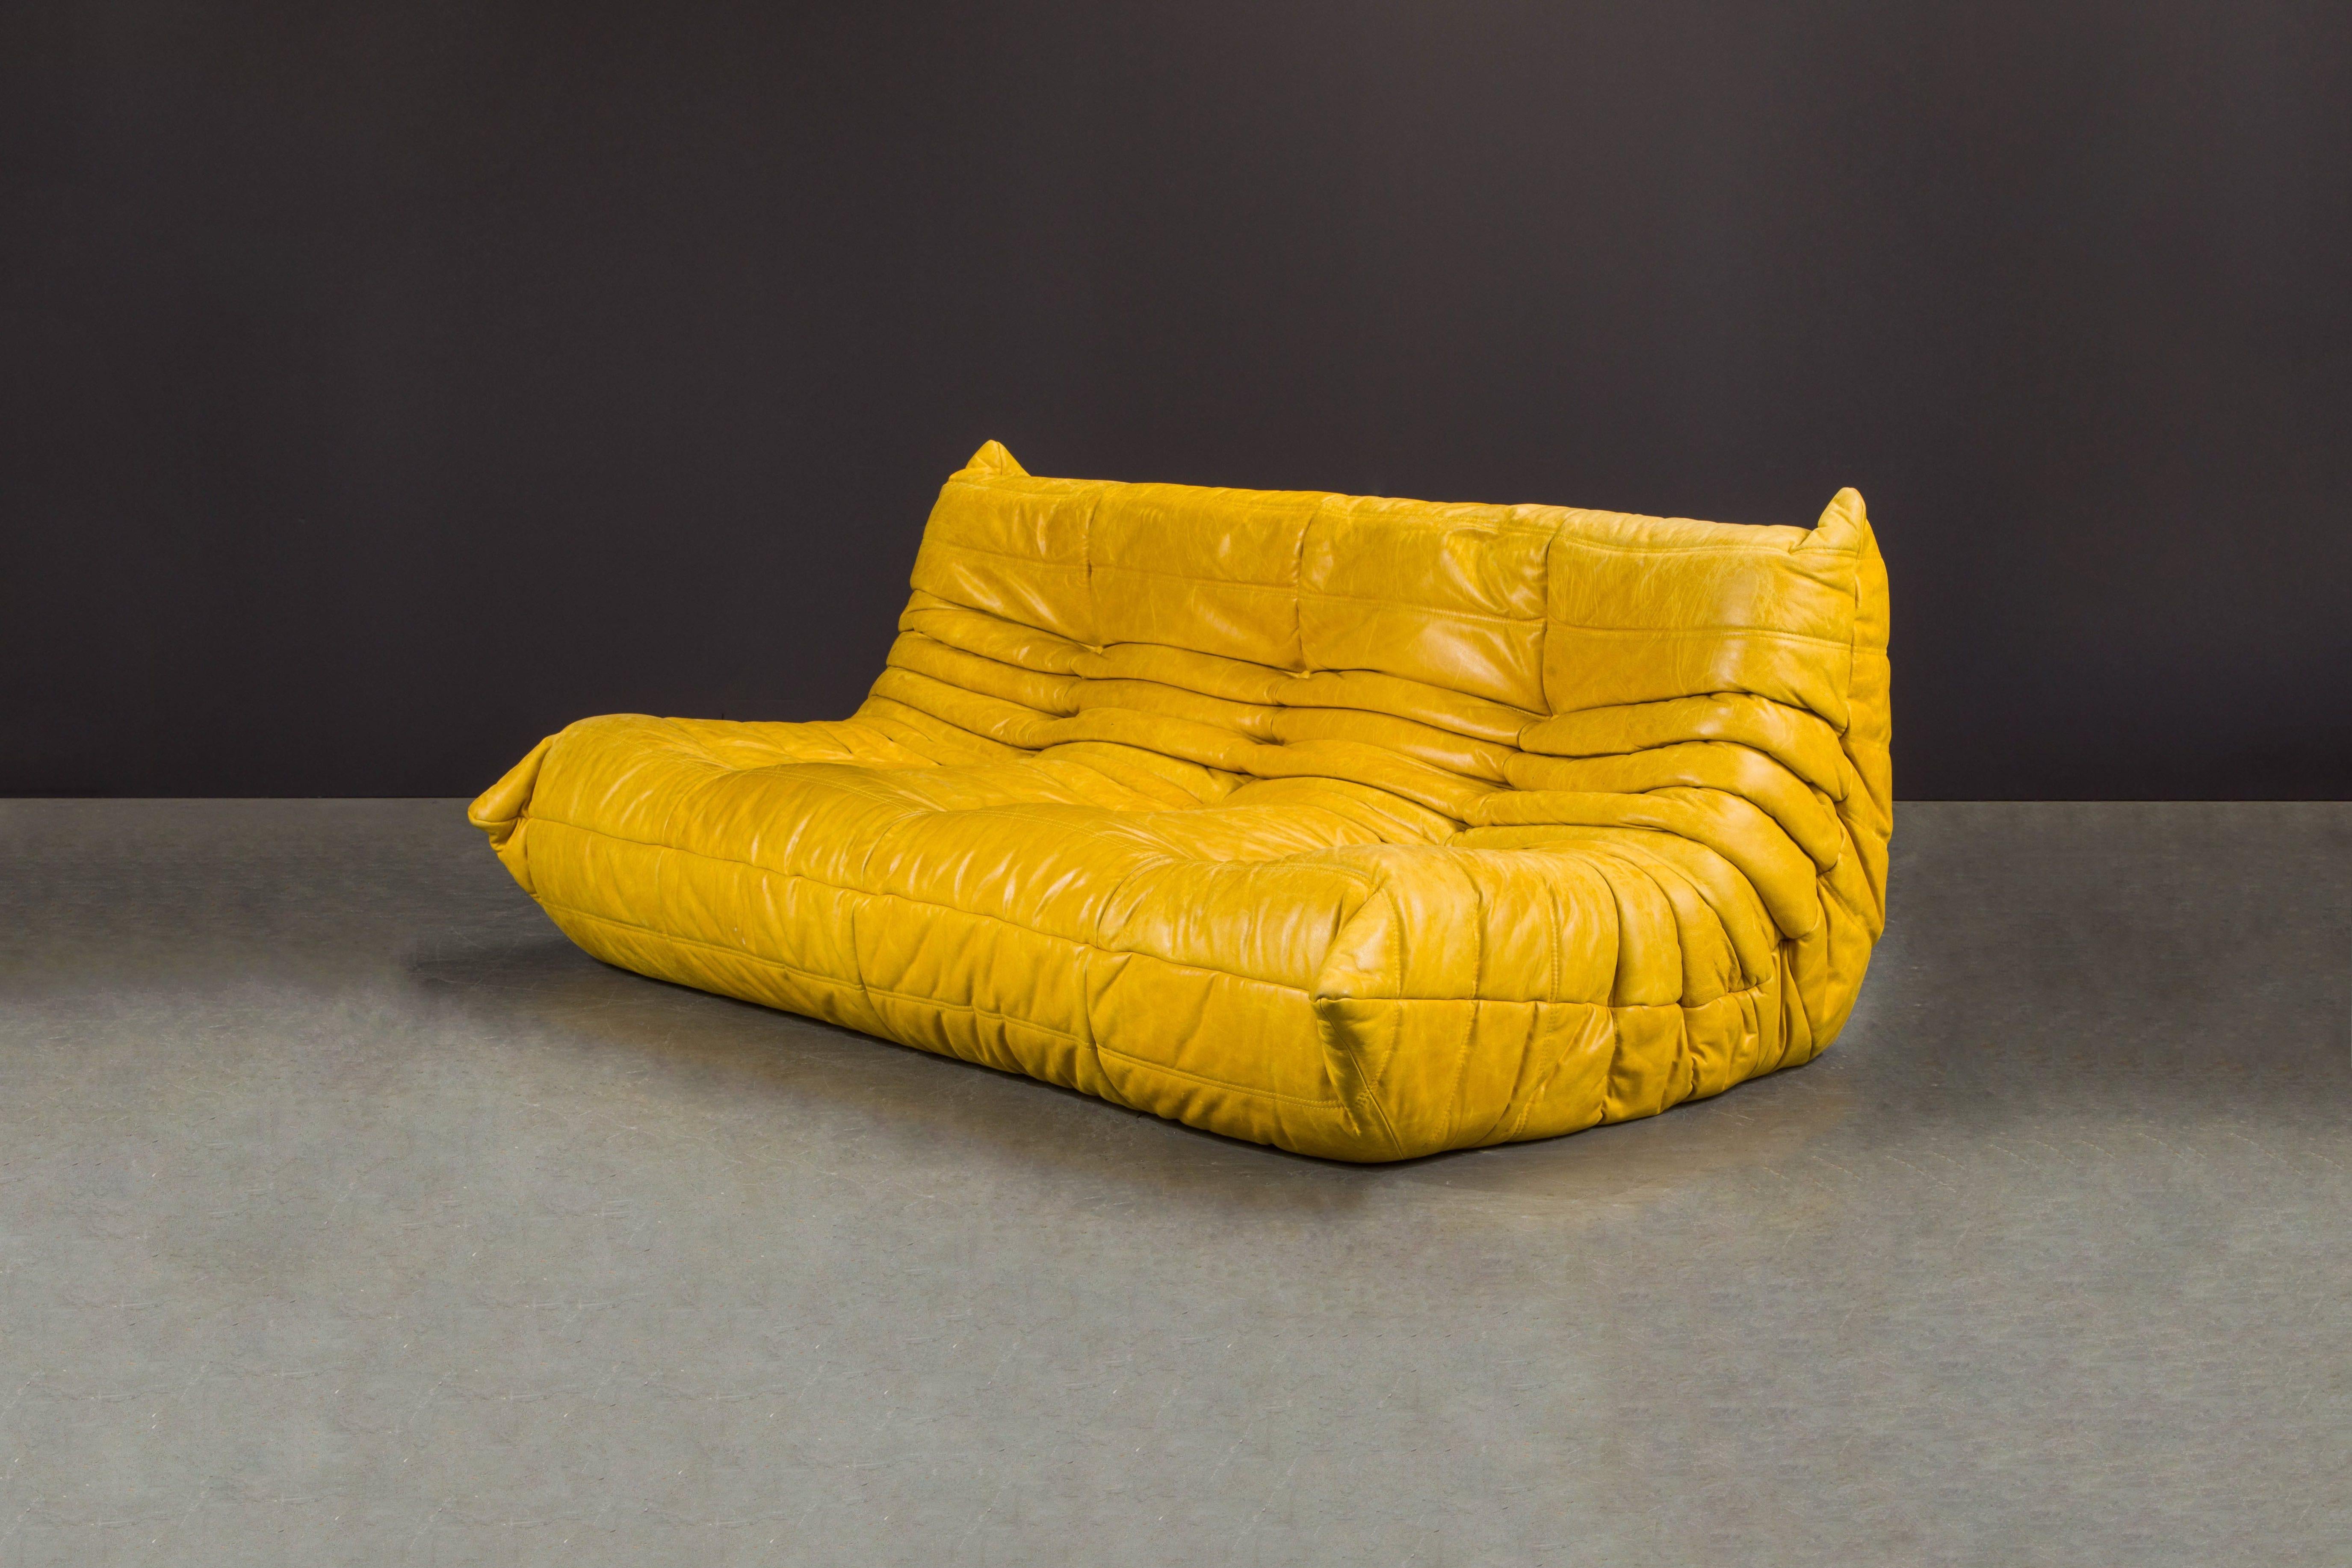 Yellow Leather 'Togo' Three Seat Sofa by Michel Ducaroy for Ligne Roset, Signed 2